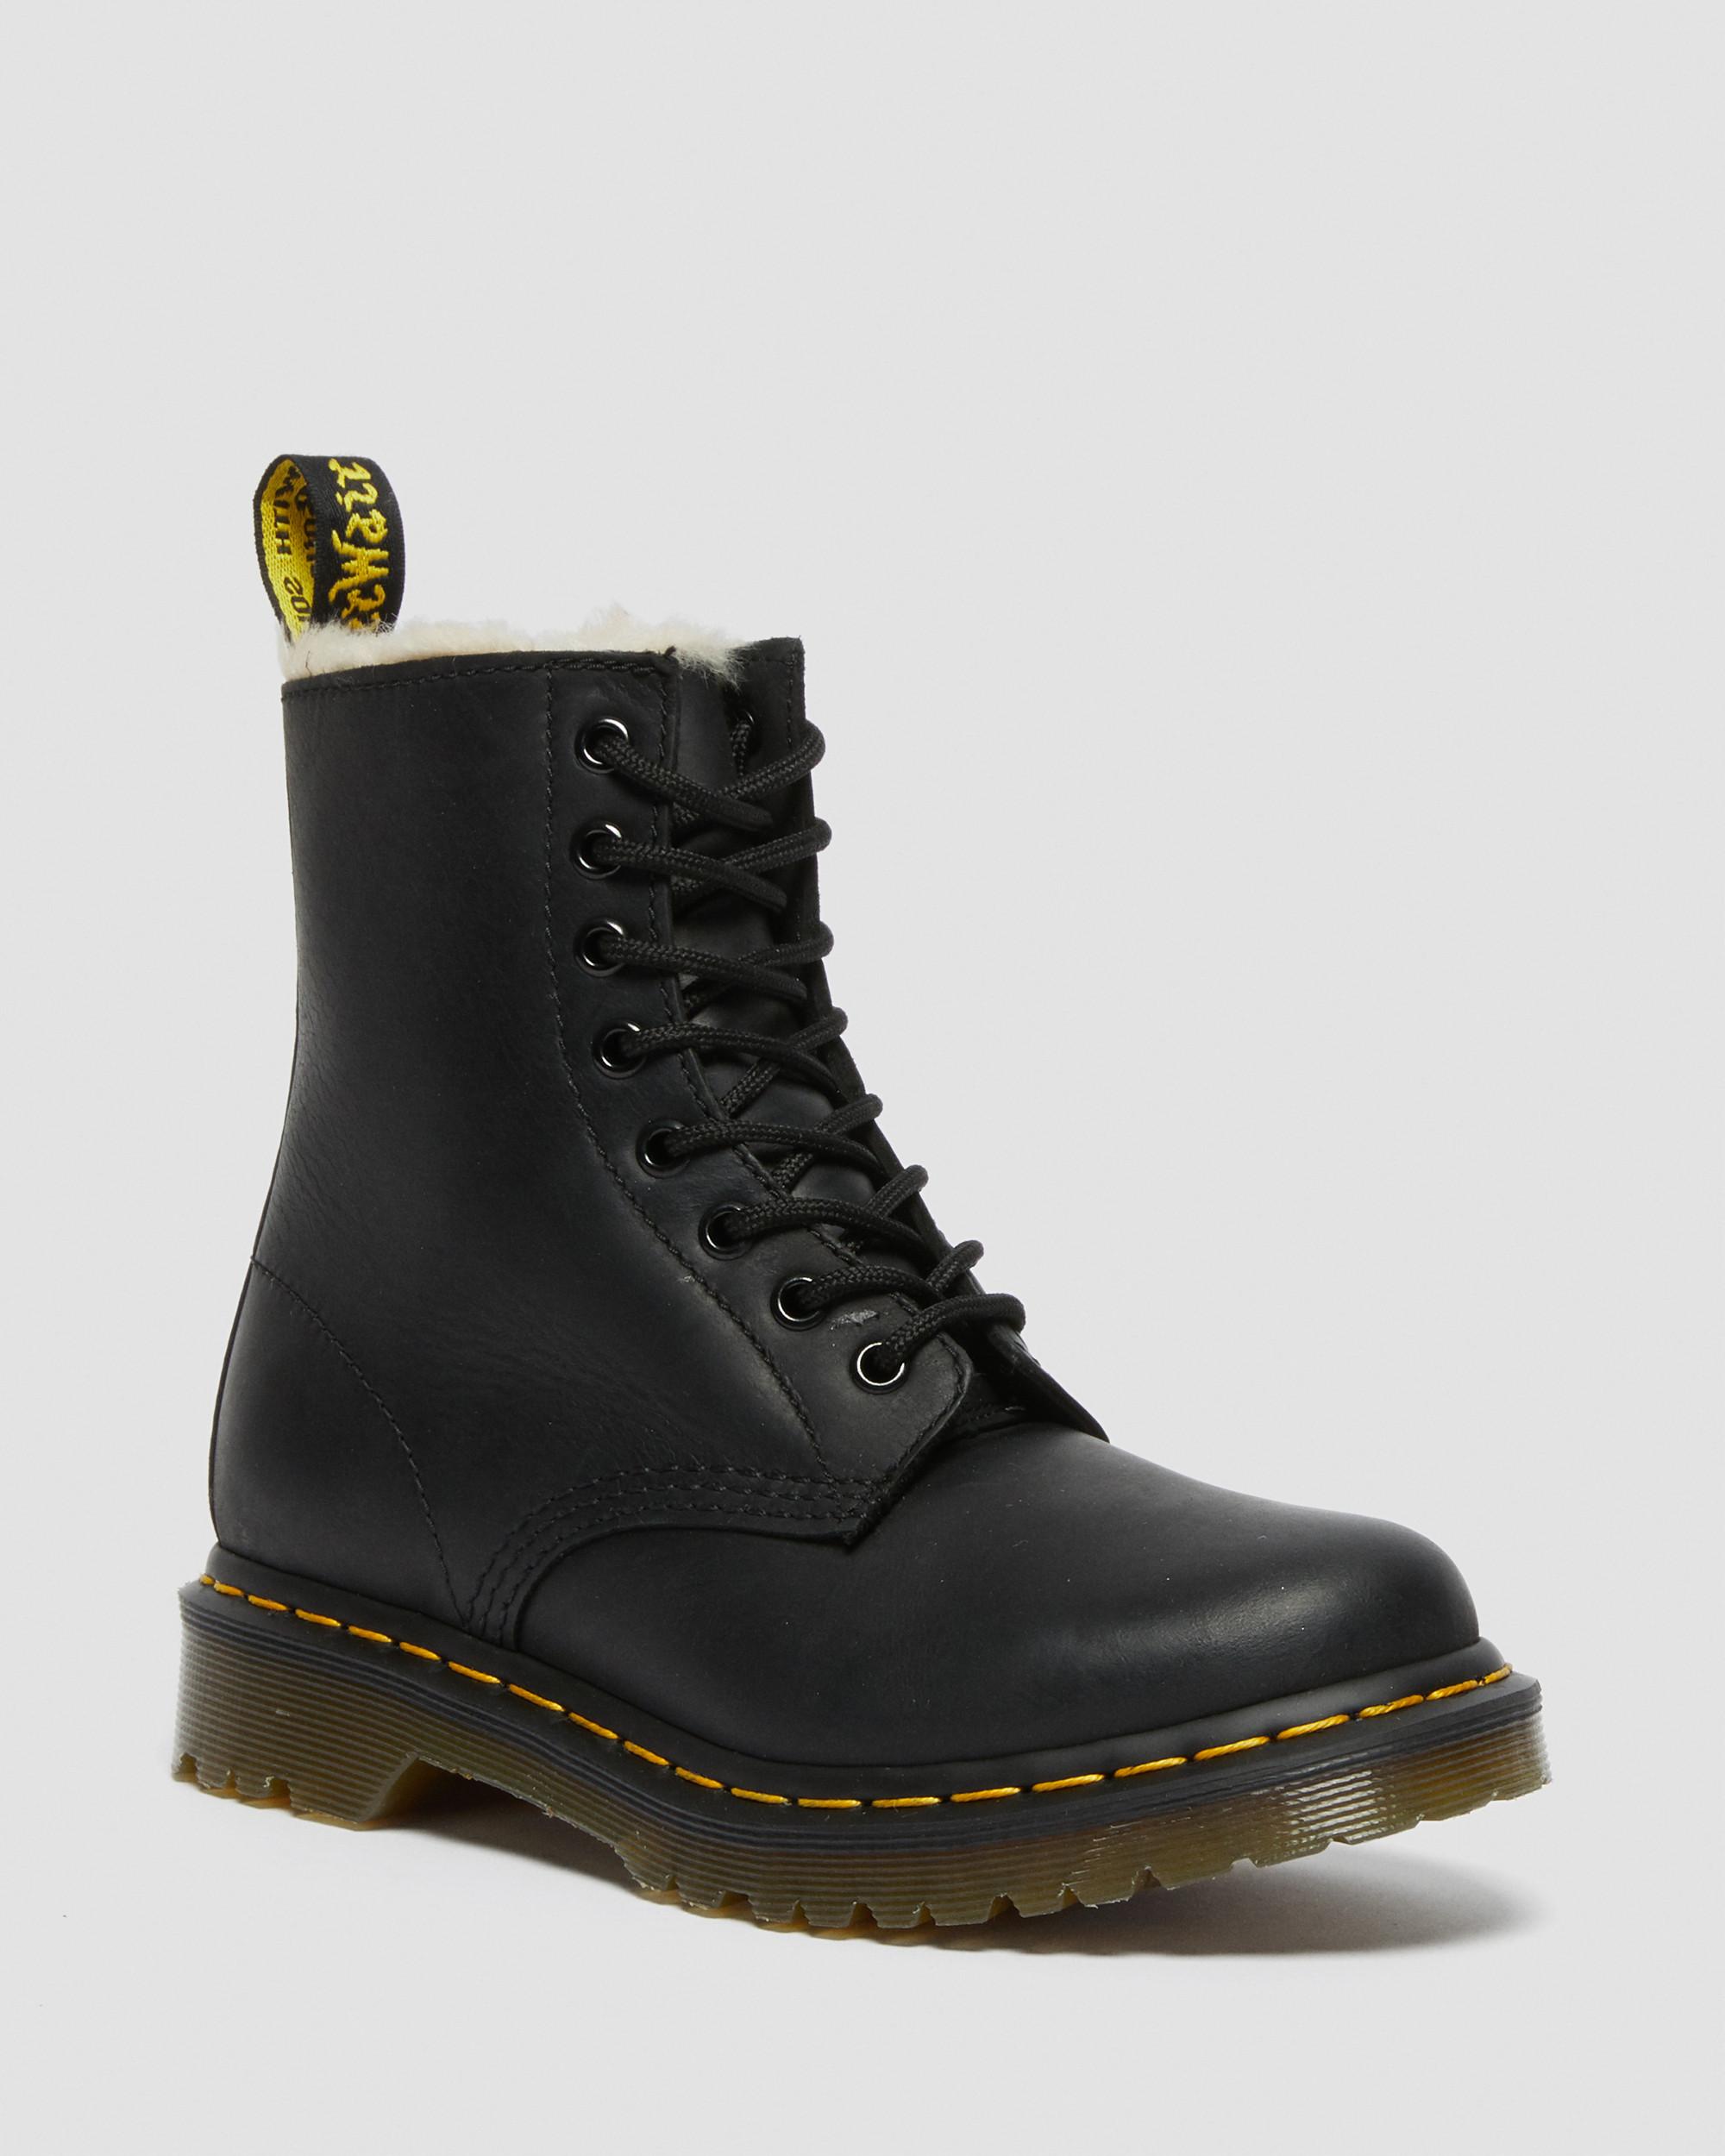 1460 Serena Faux Fur Lined Leather Lace Up Boots1460 Serena Faux Fur Lined Leather Lace Up Boots Dr. Martens